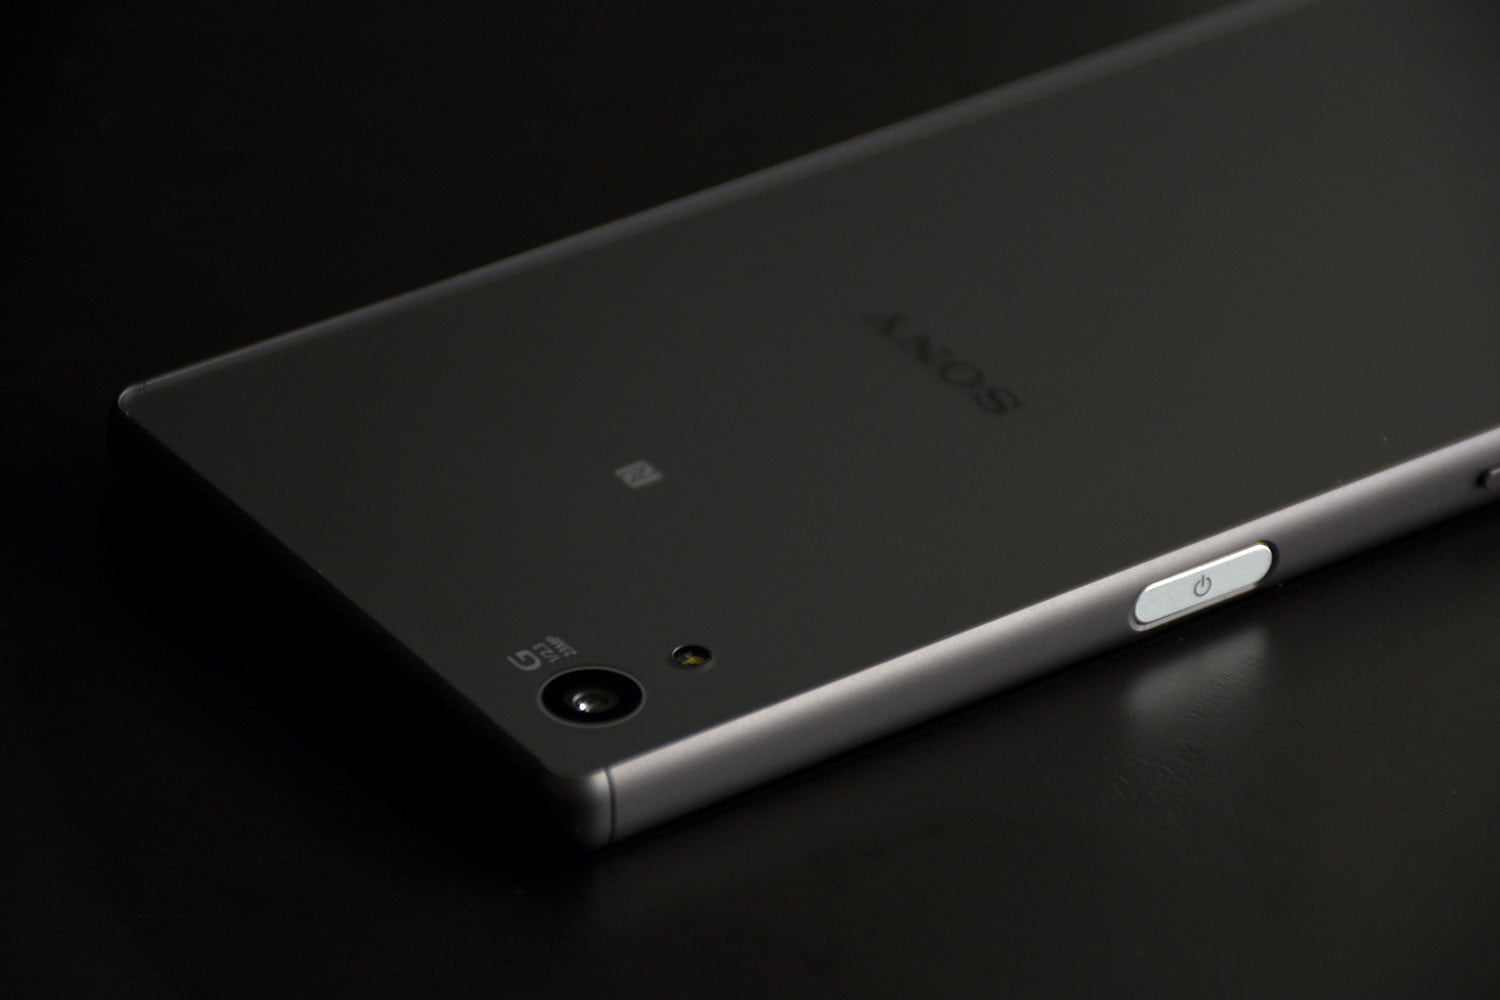 Xperia Z5, Z3 Plus, Z4 Tab stabilized some performance issues with an App Update 1